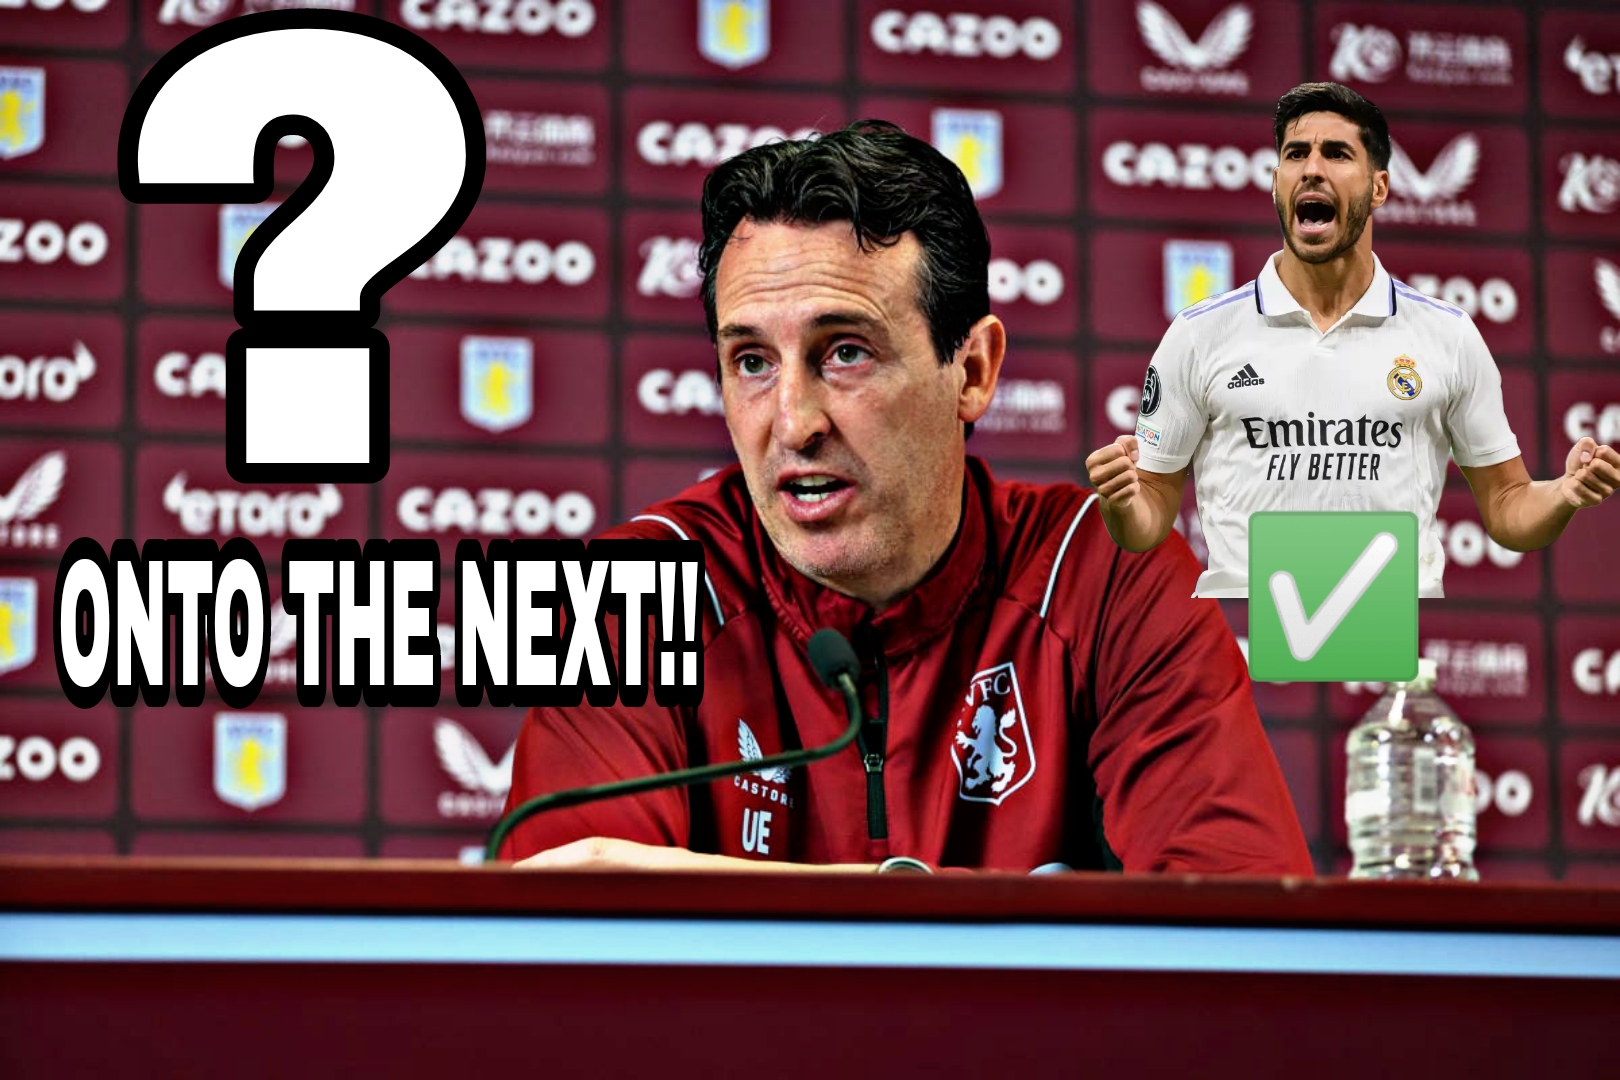 Just in!!! After securing Asensio’s transfer, Aston villa now battle struggling Chelsea for star defender who’s rated one of the most talented centre back in his league